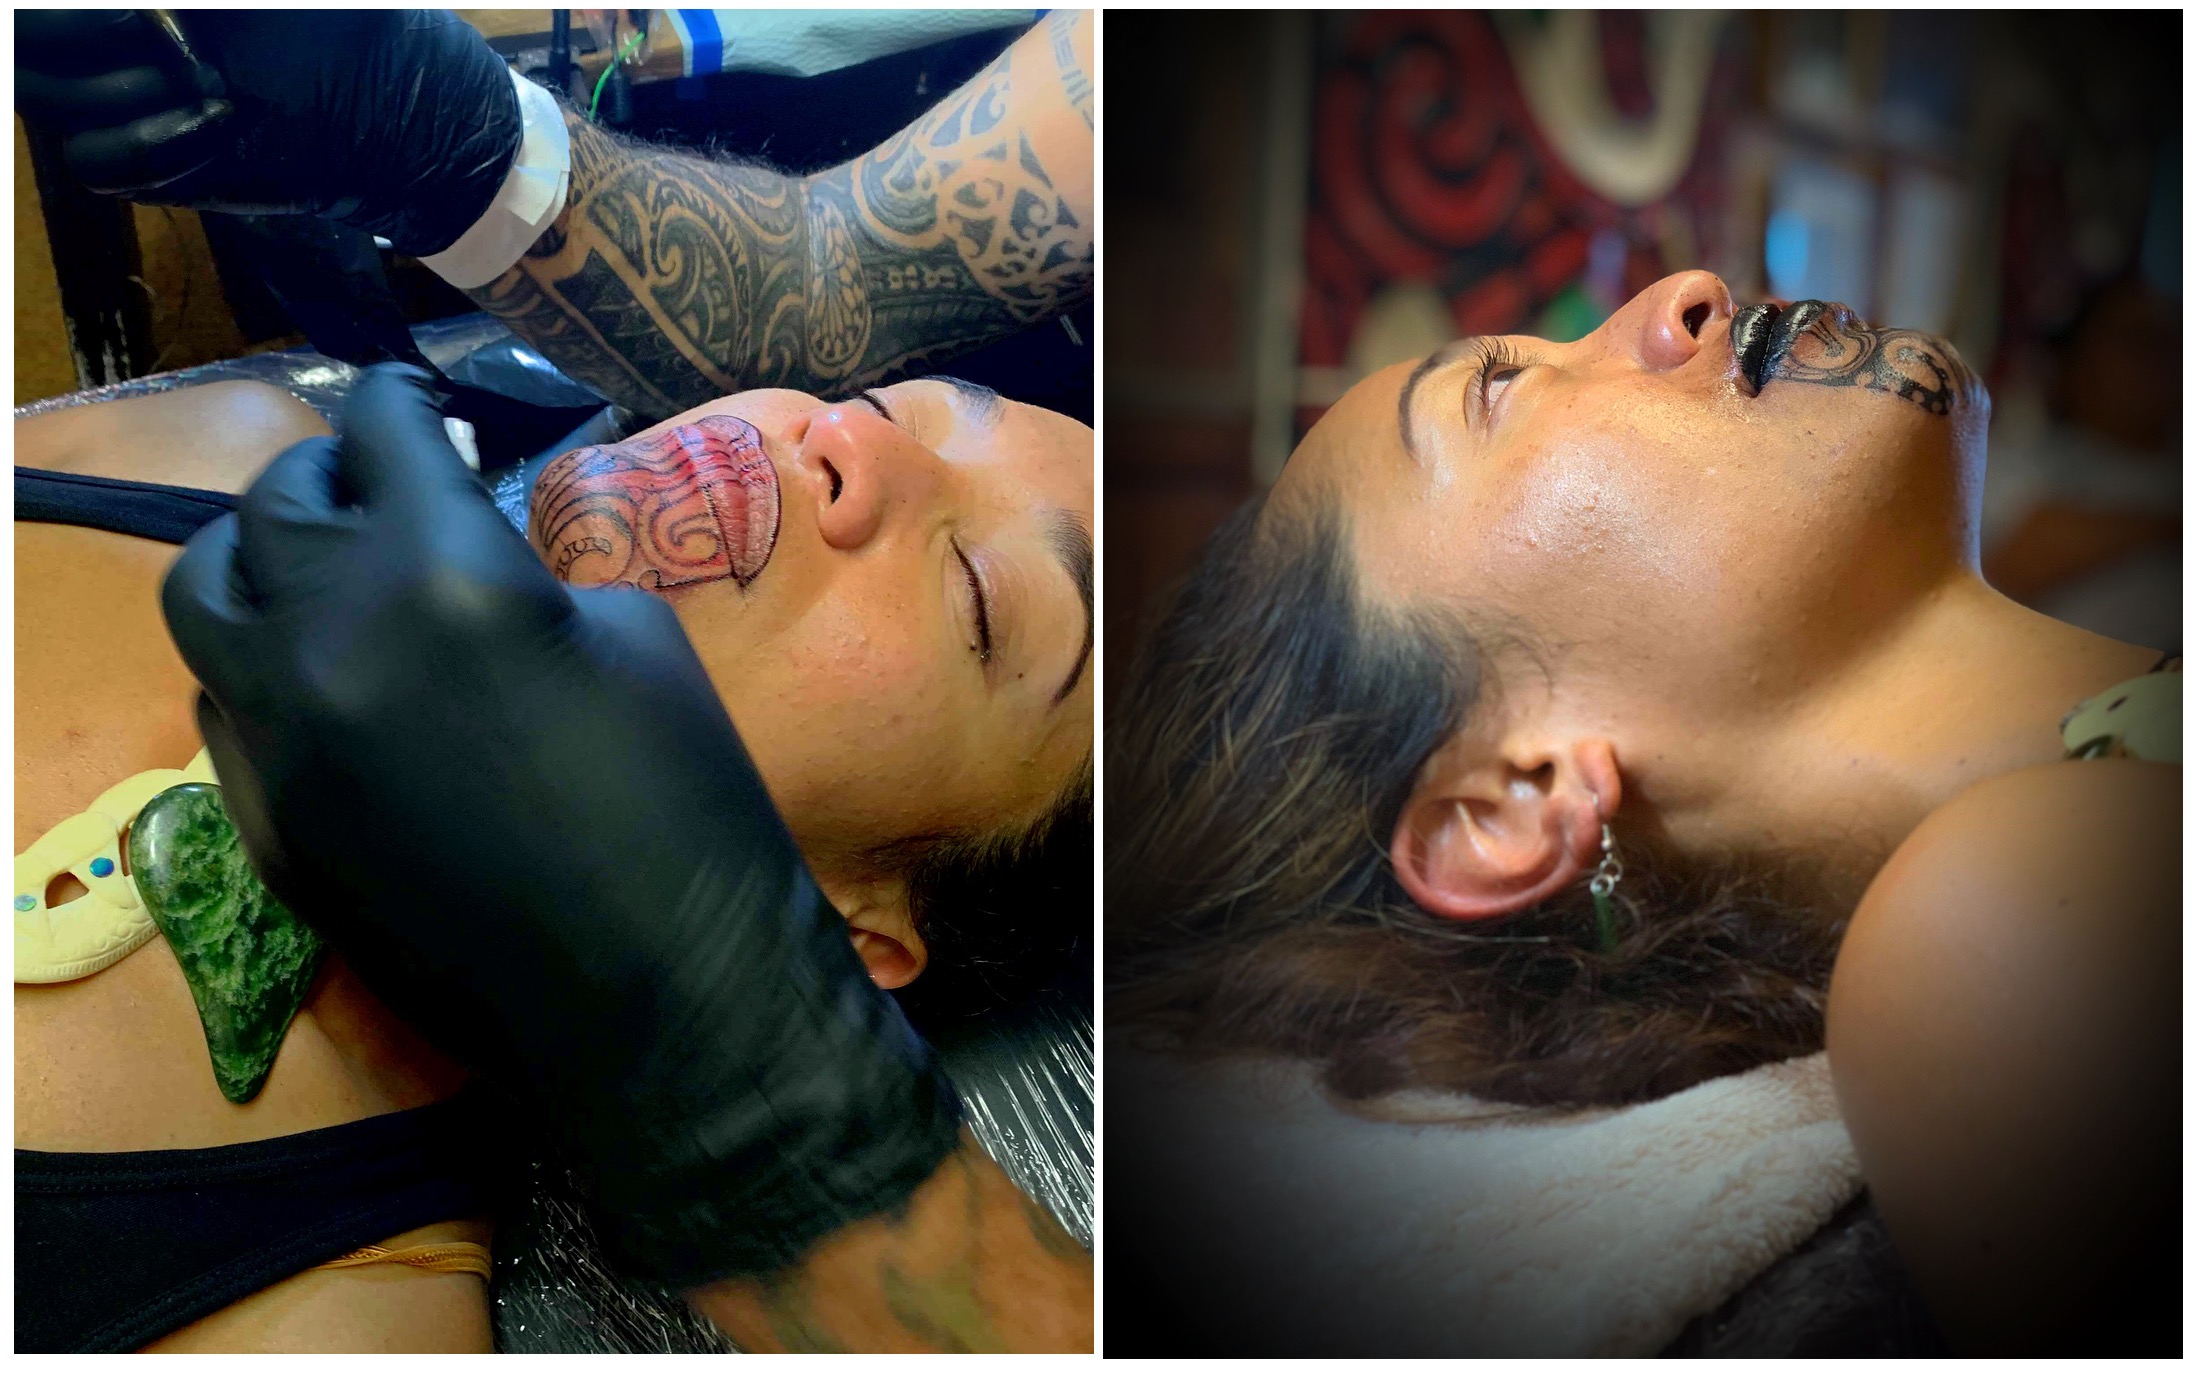 It also perpetuates a traditional taonga passed down over many generations from the ancestress Niwareka — Oriini Kaipara posted these images of her moko kauae tattooing to Instagram 5 January 2019.